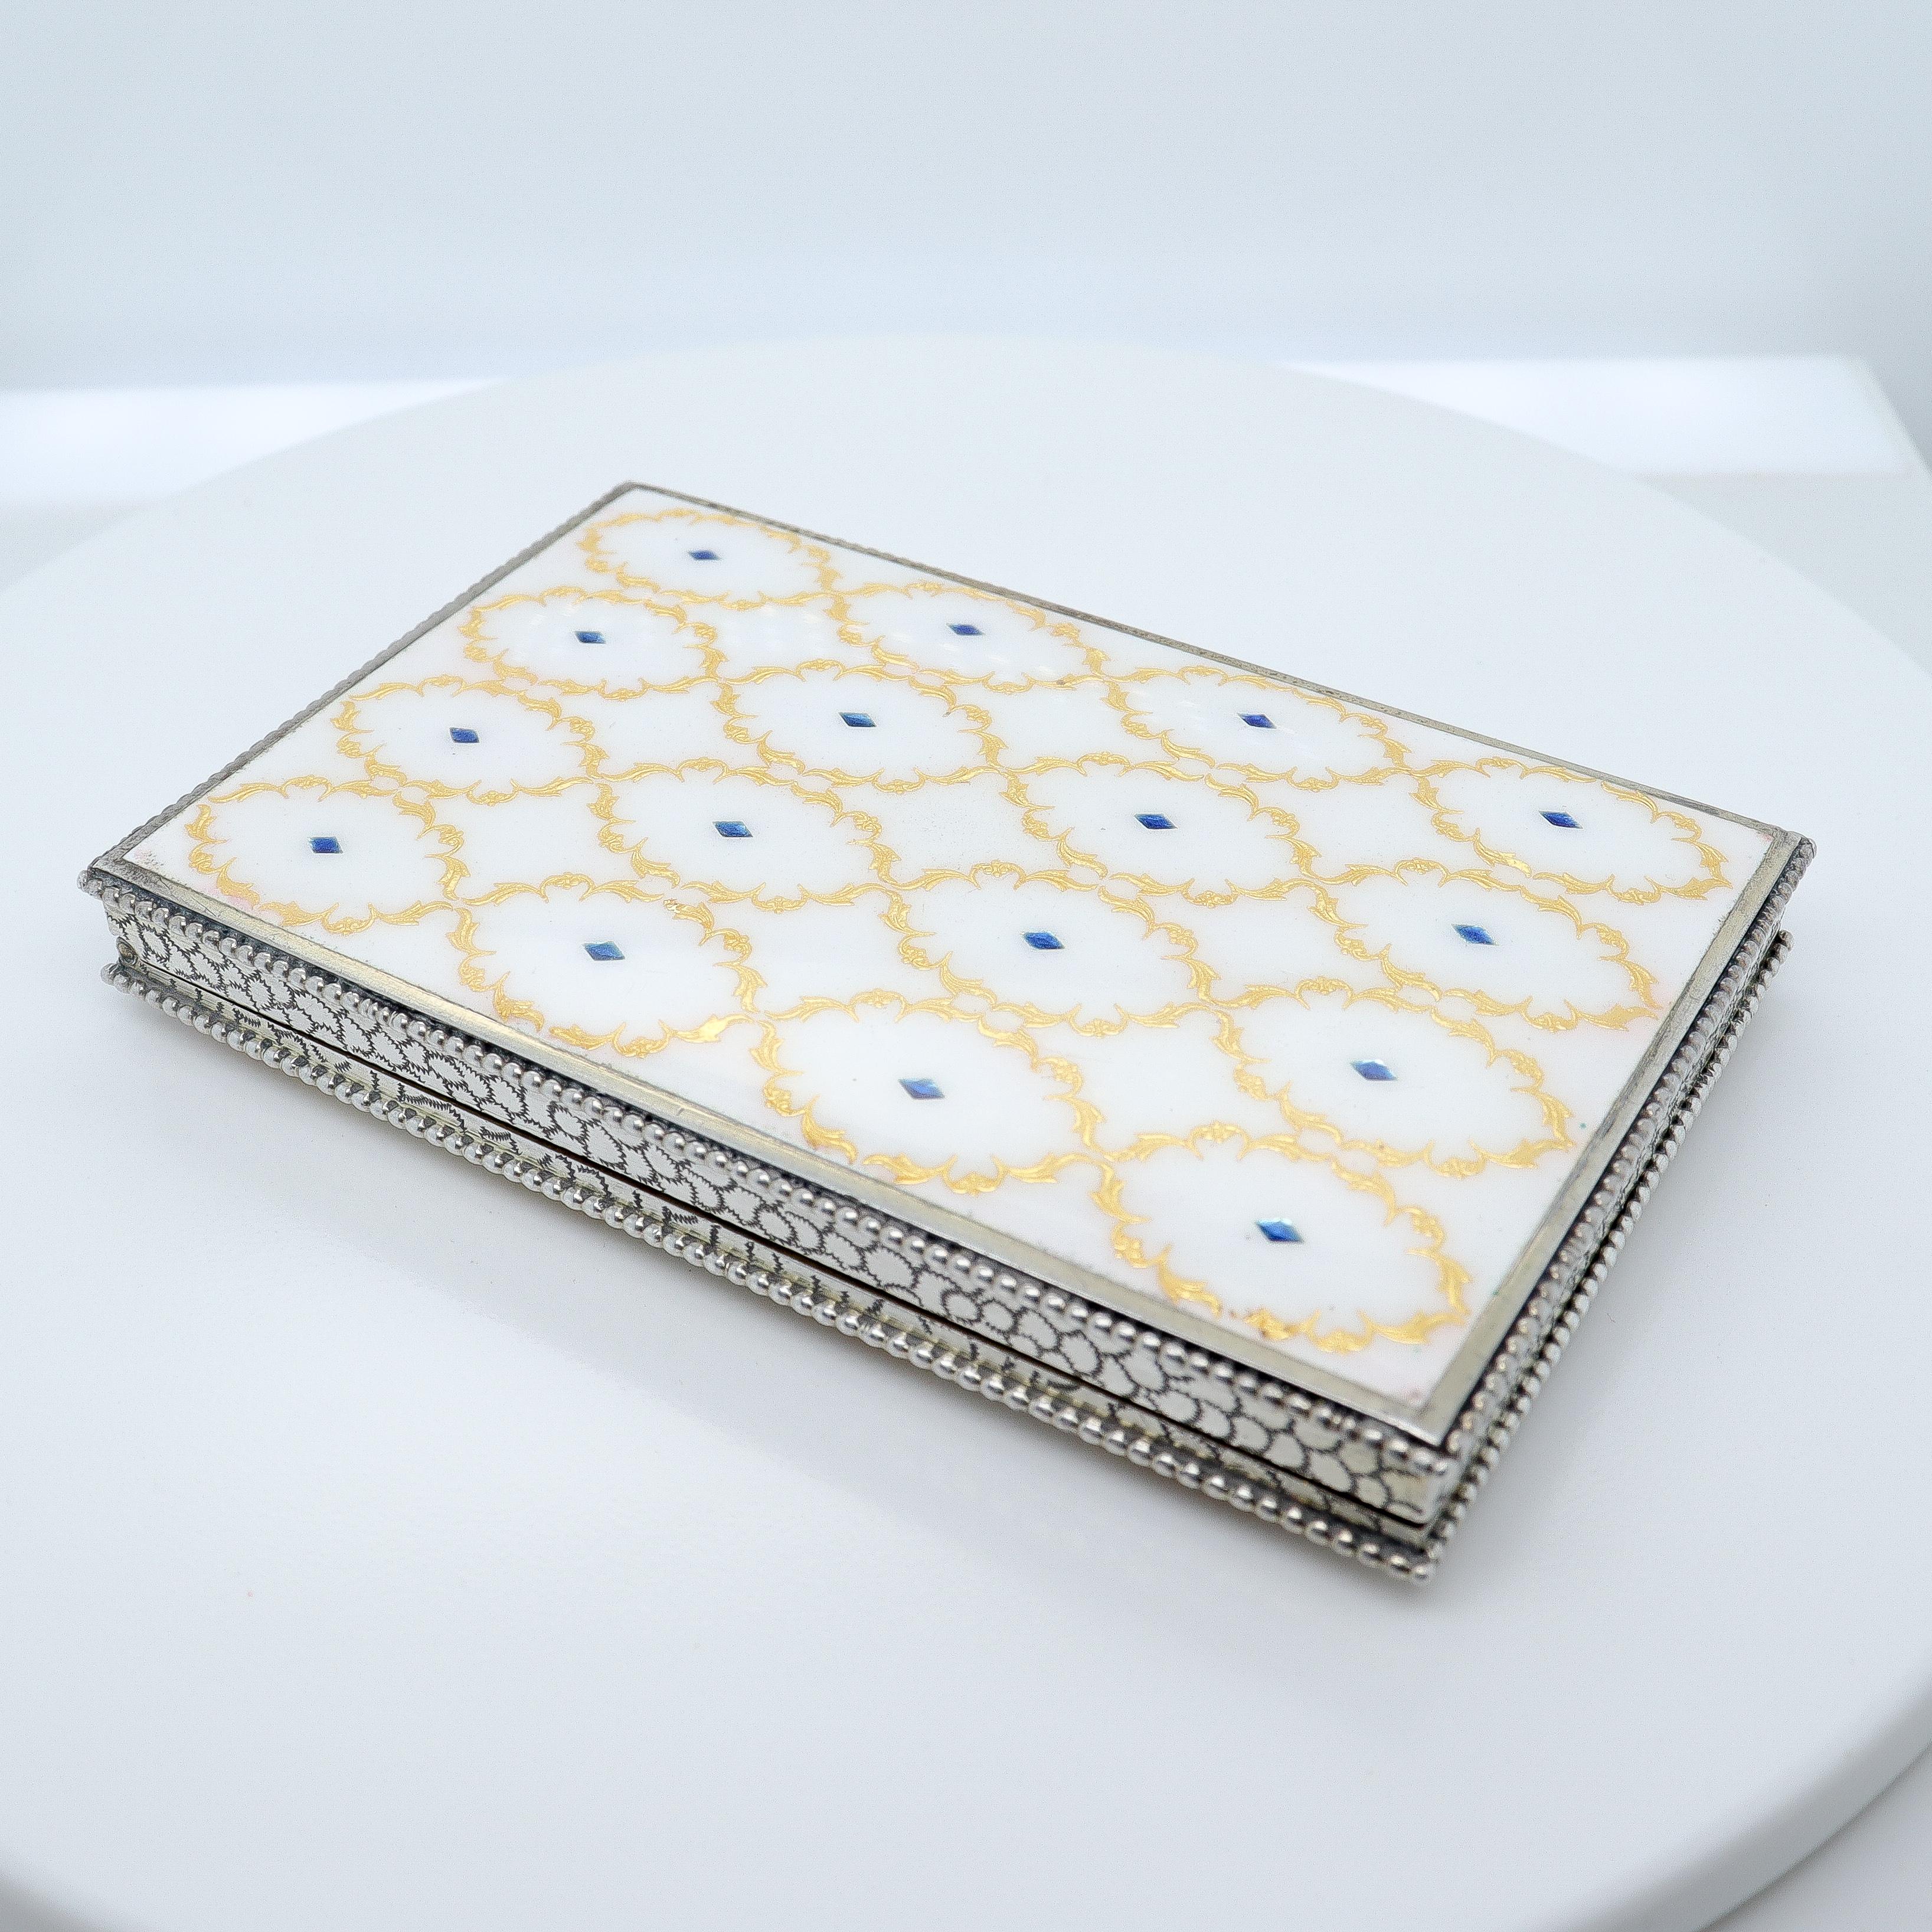 A very fine antique silver enamel box.

In Austrian 800 silver.

With white and blue polka dot panels decorated with gilt cartouches, beaded edges, engraved sides, and a gilt interior.

Fully marked to the interior with Austrian hallmarks.

Simply a